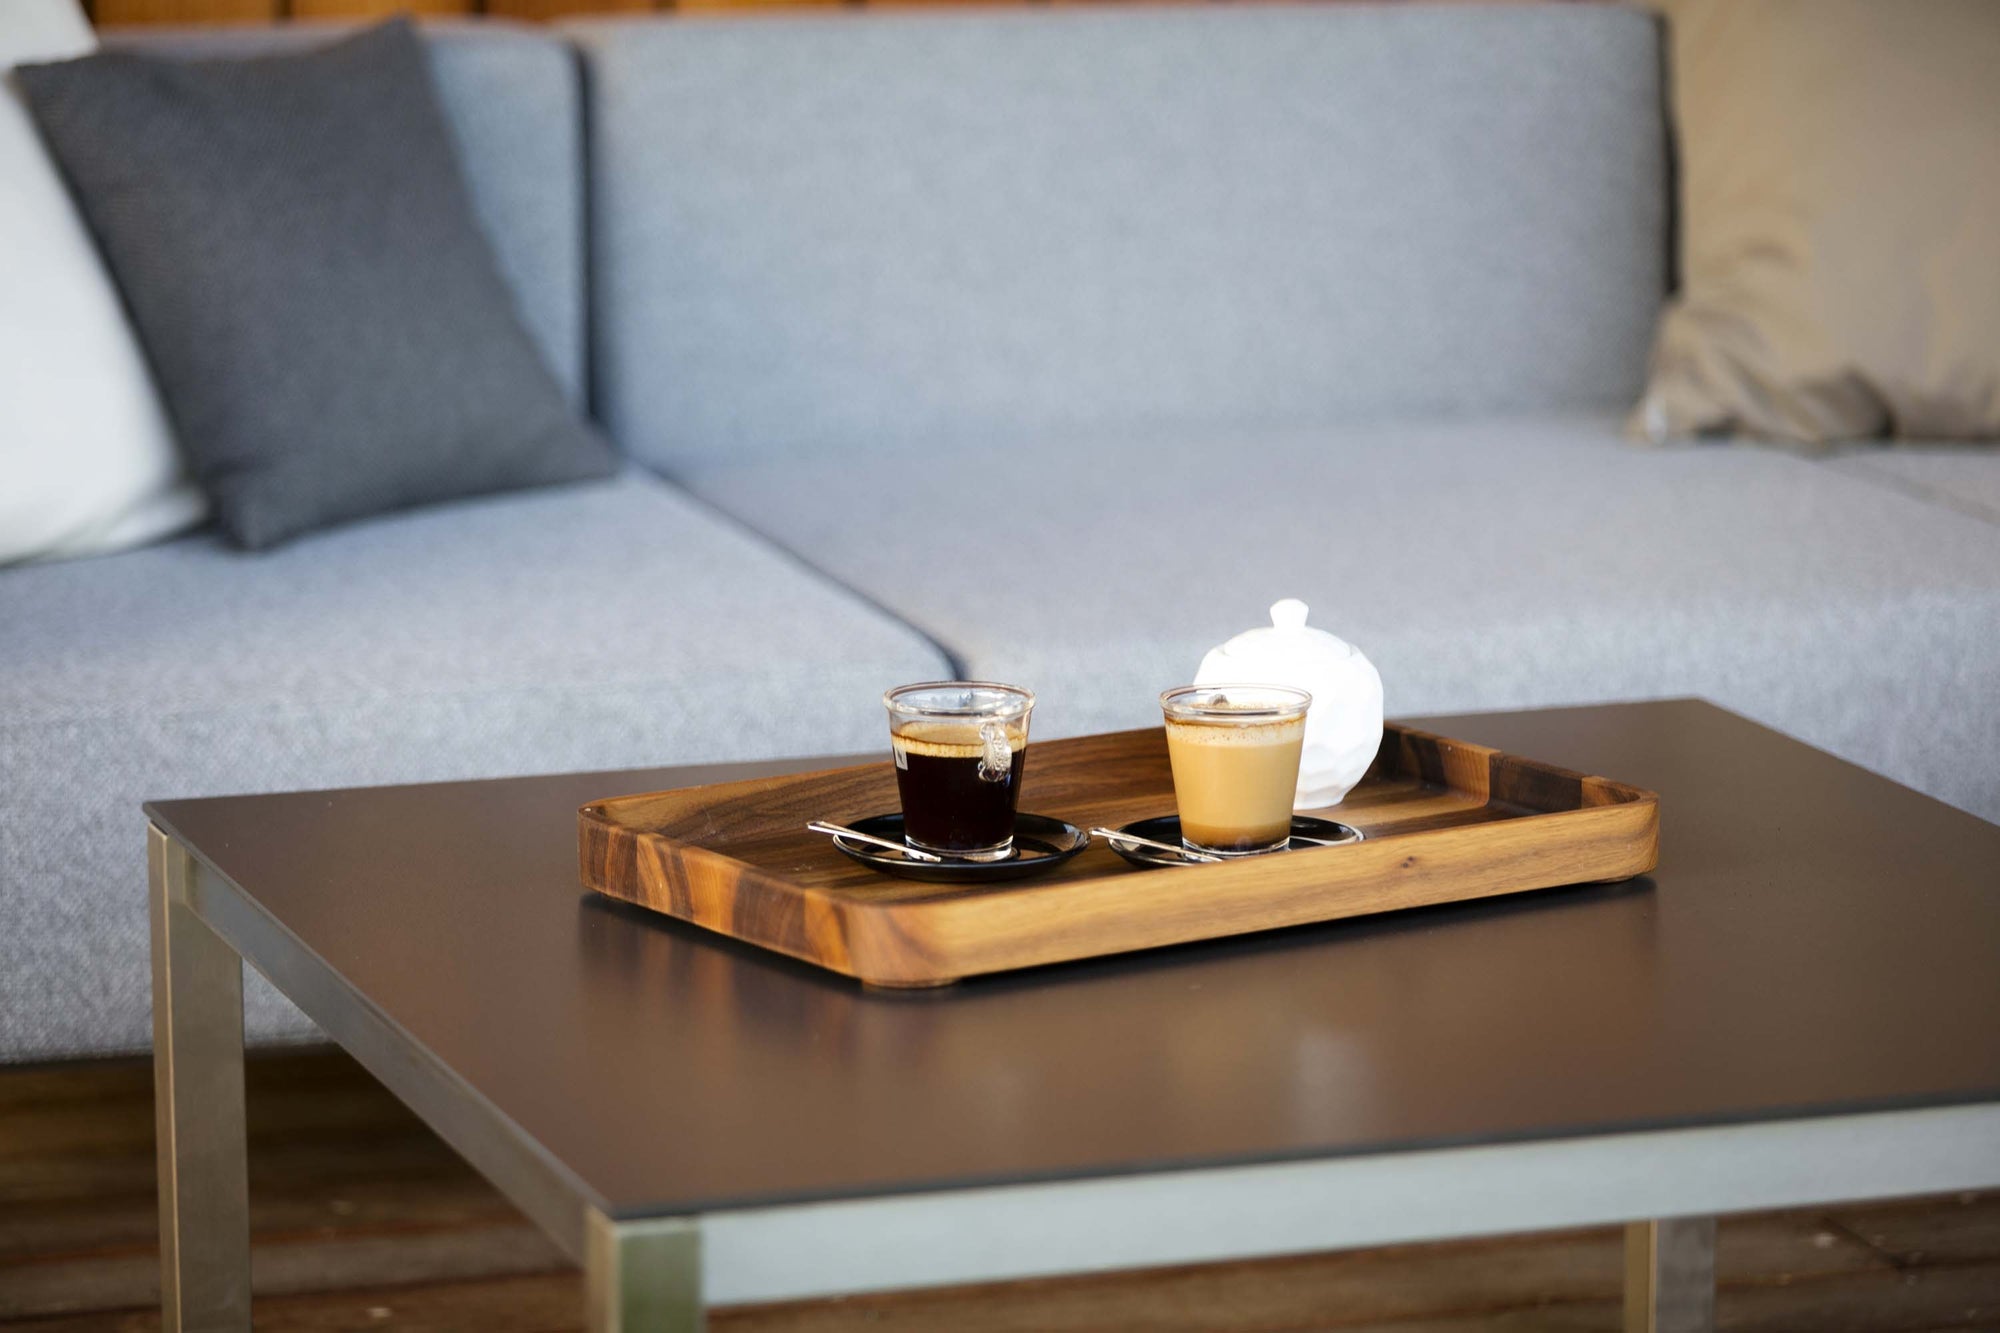 Todus Puro coffee table in several sizes